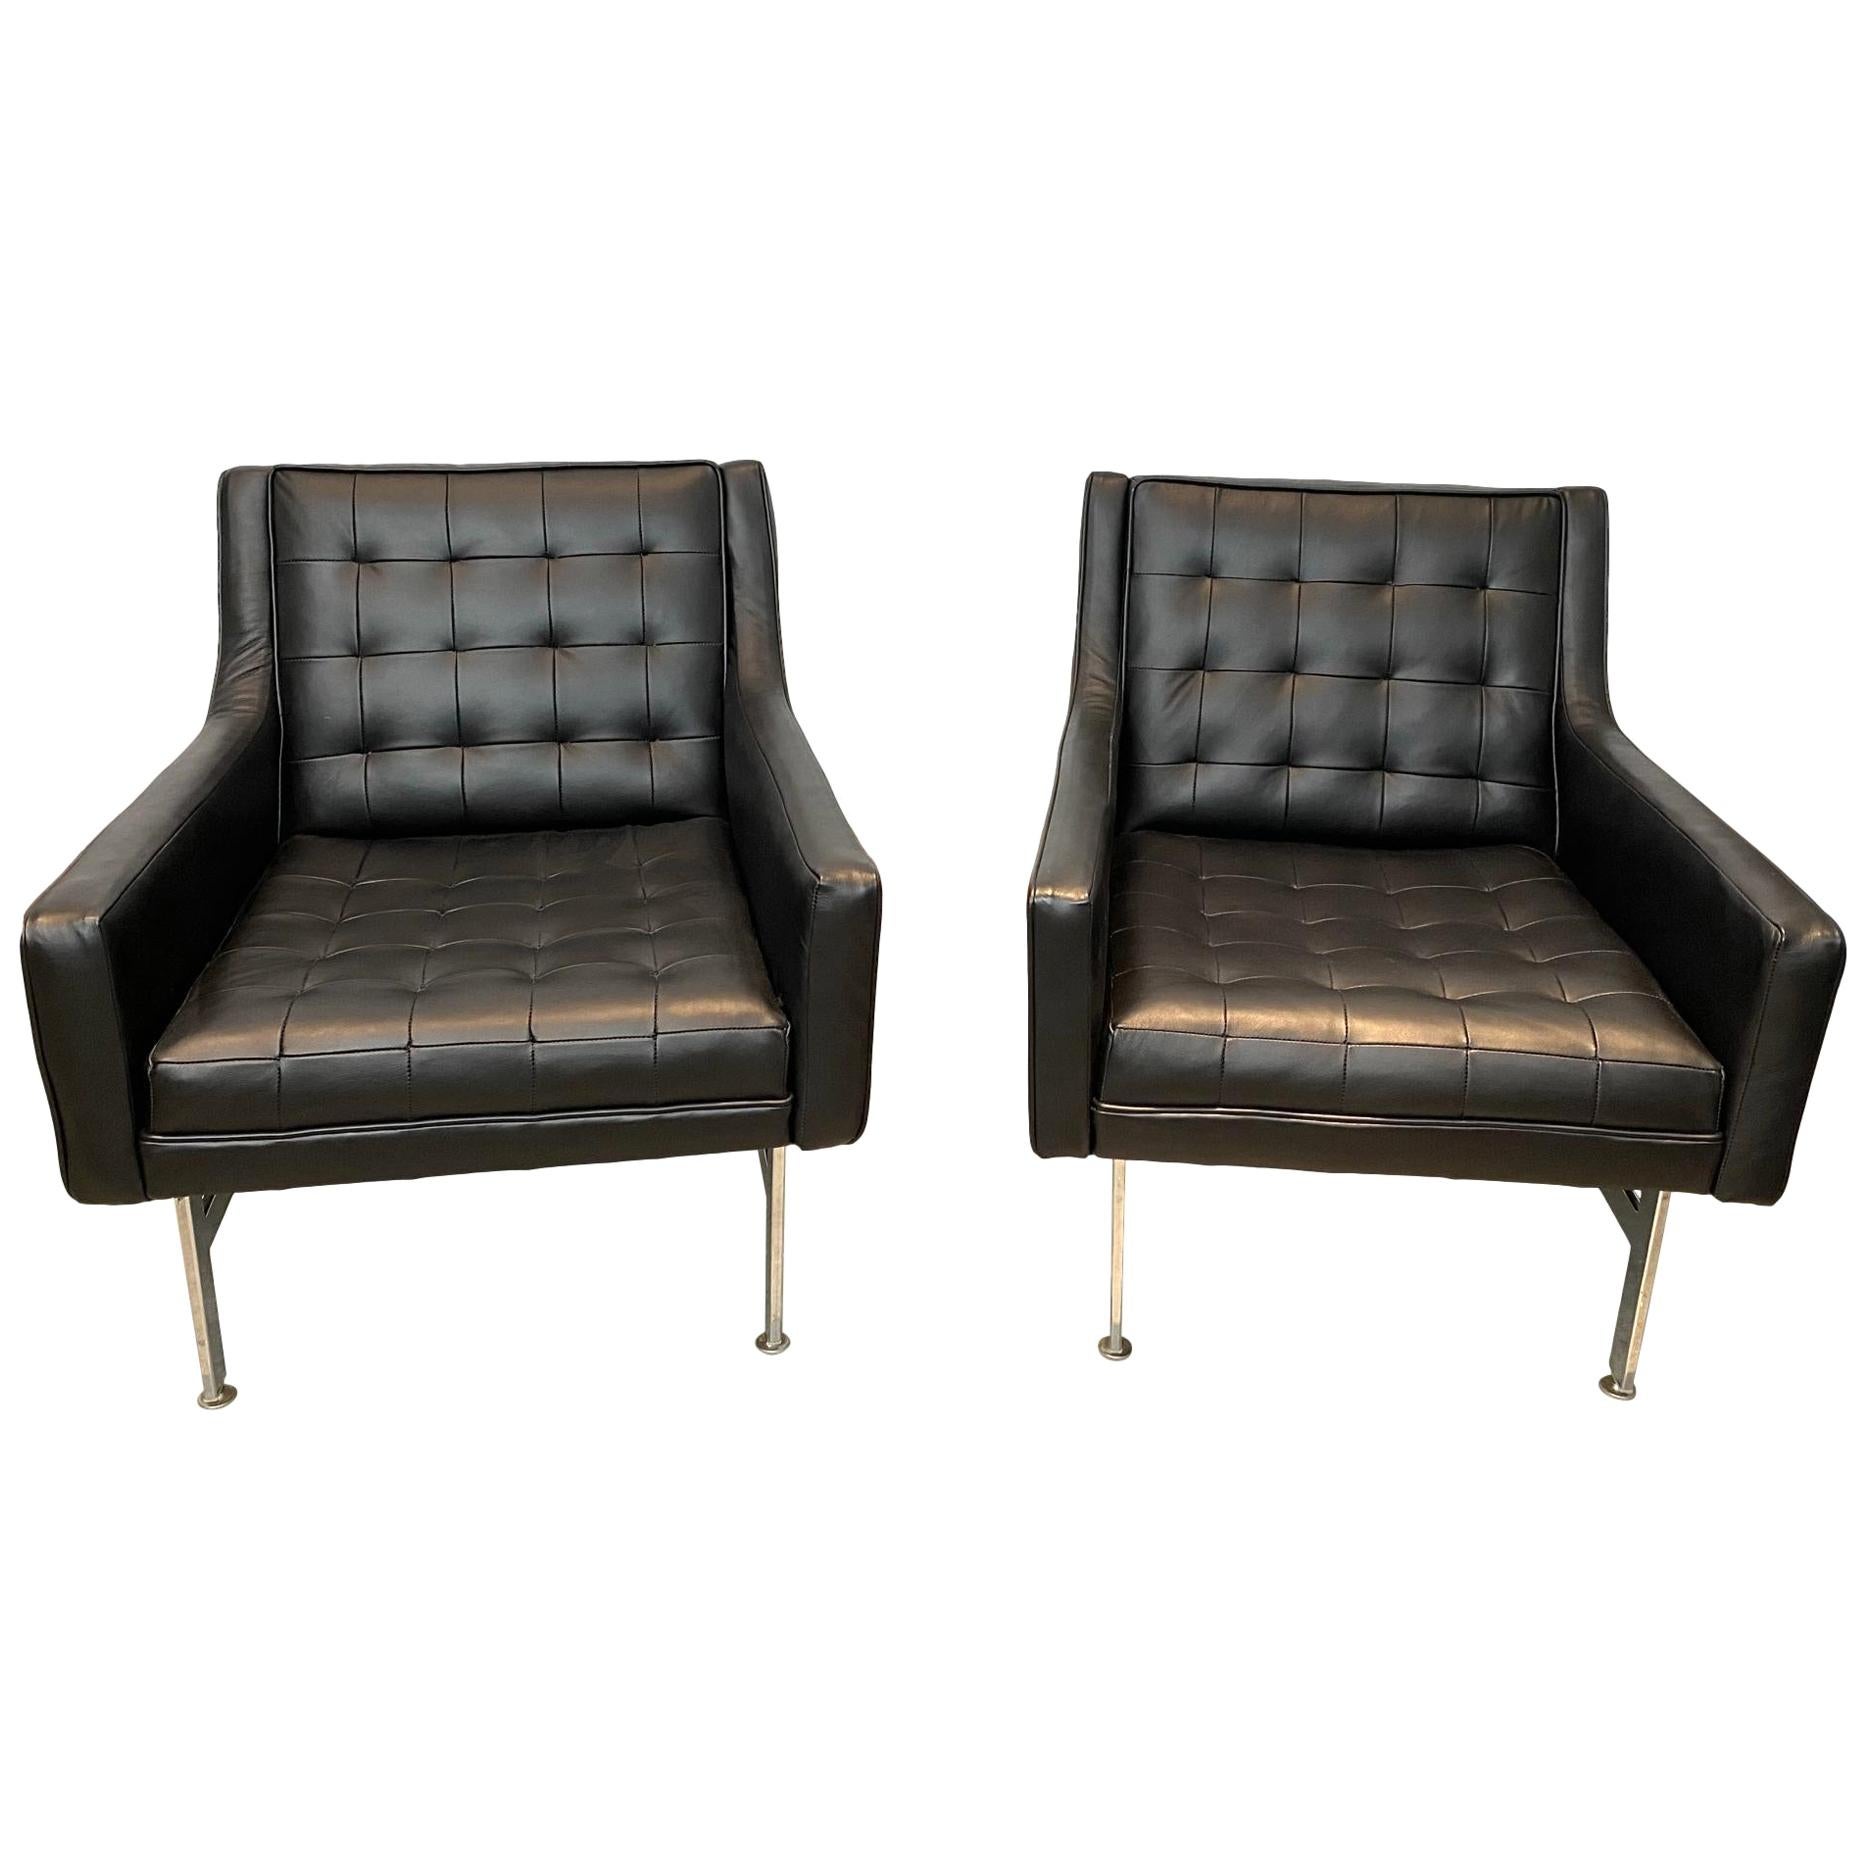 Midcentury Lounge Chairs-Chrome Base-Newly Upholstered in Italian Leather, Pair